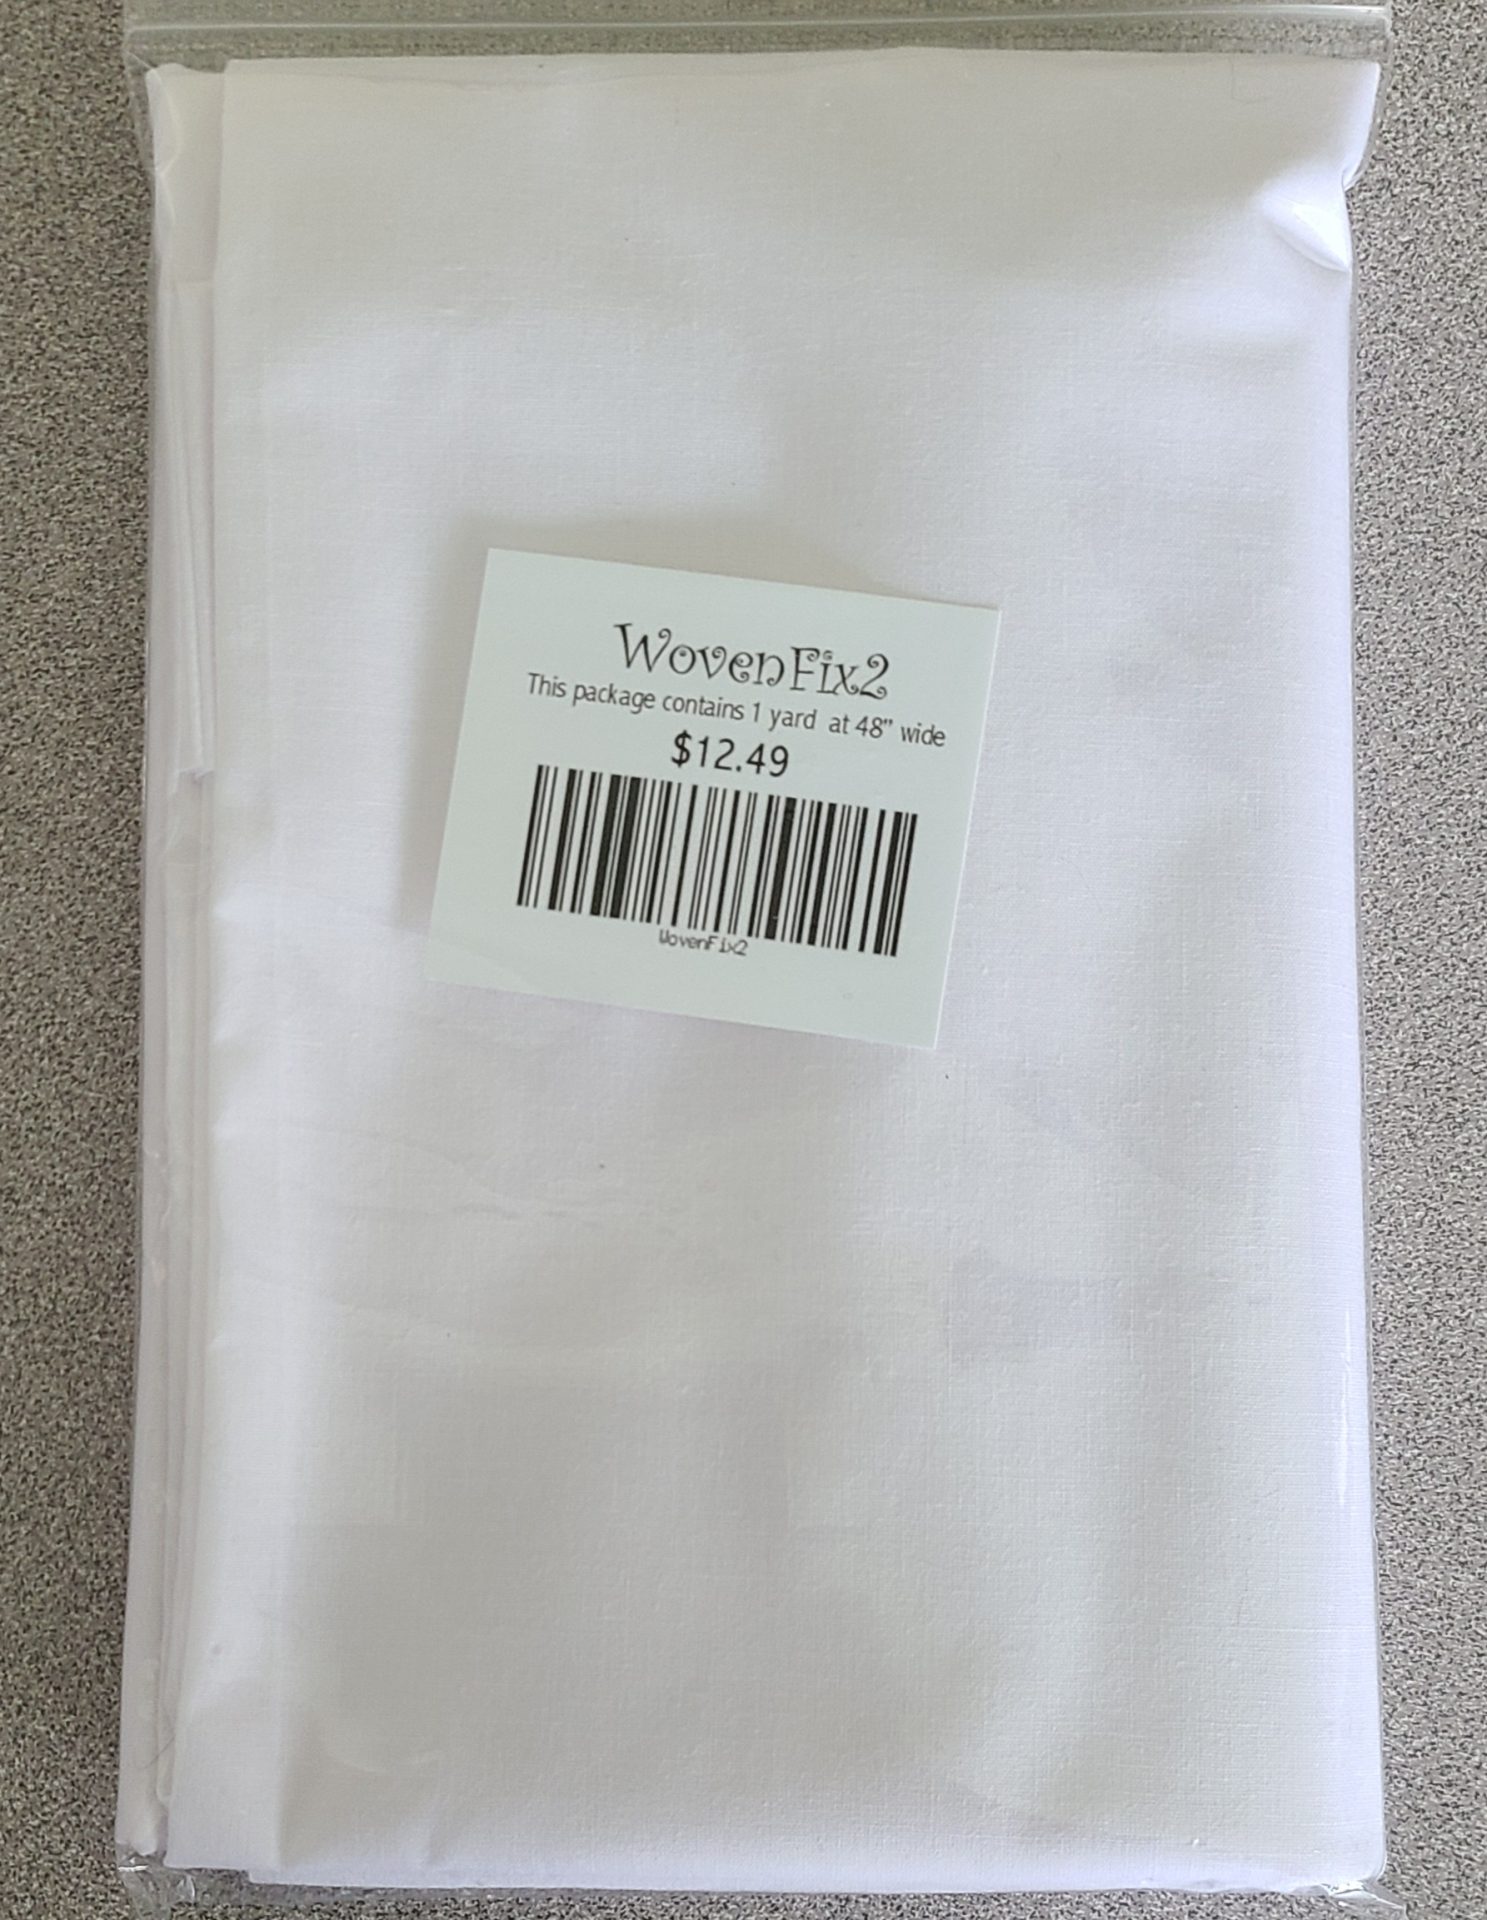 A white piece of fabric with a barcode on it.